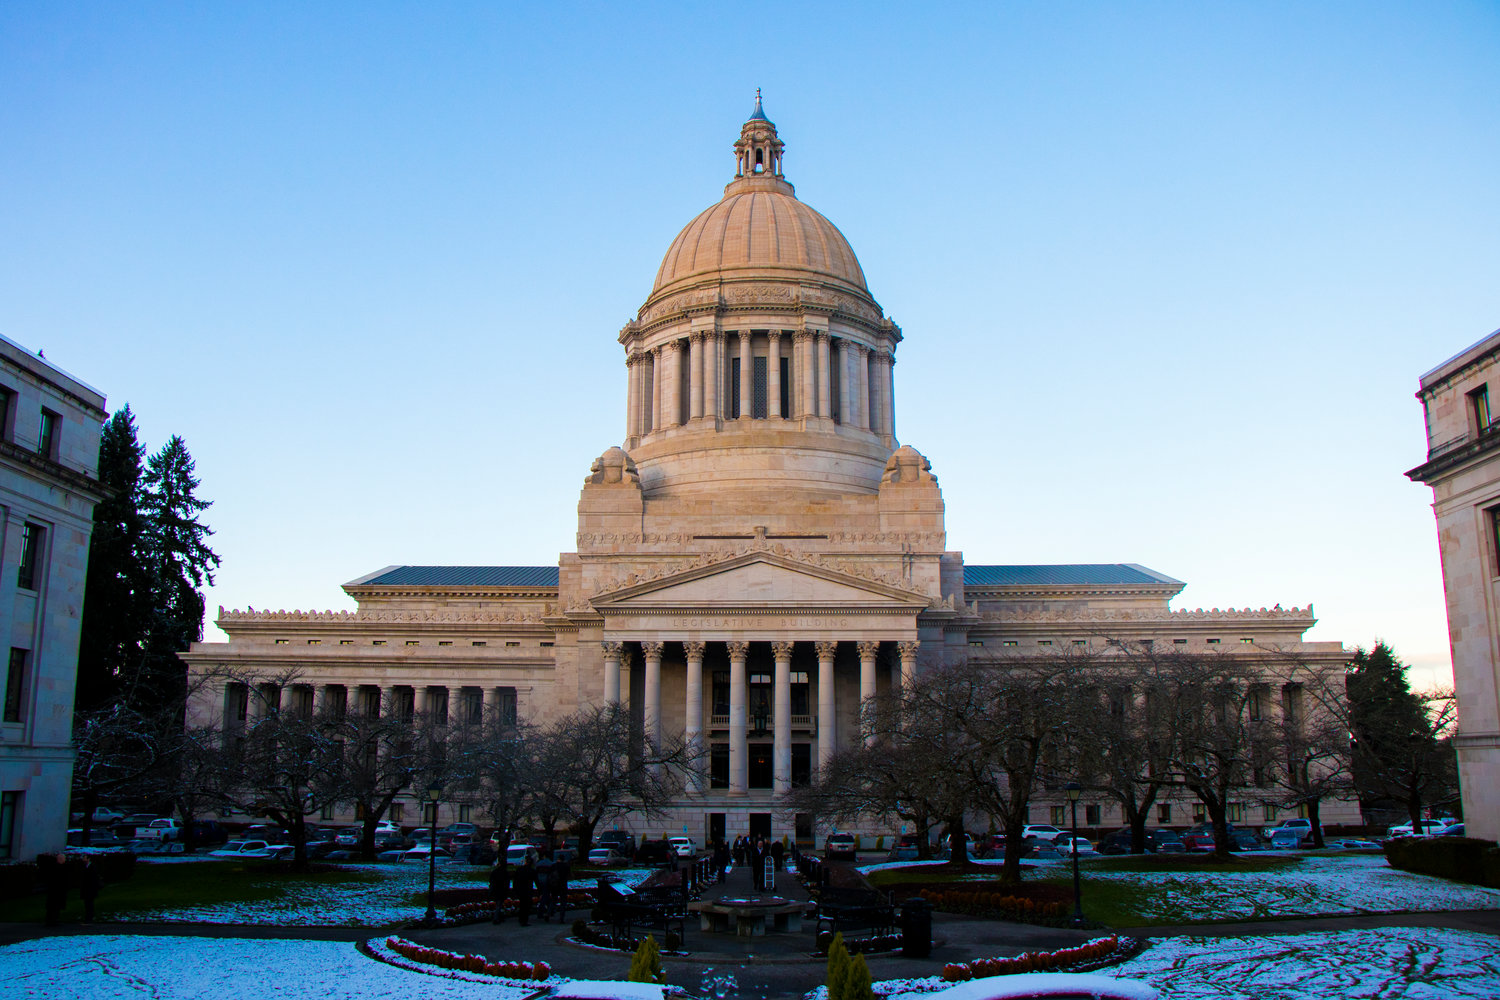 The Washington State Capitol building shown on Jan. 14, 2020.